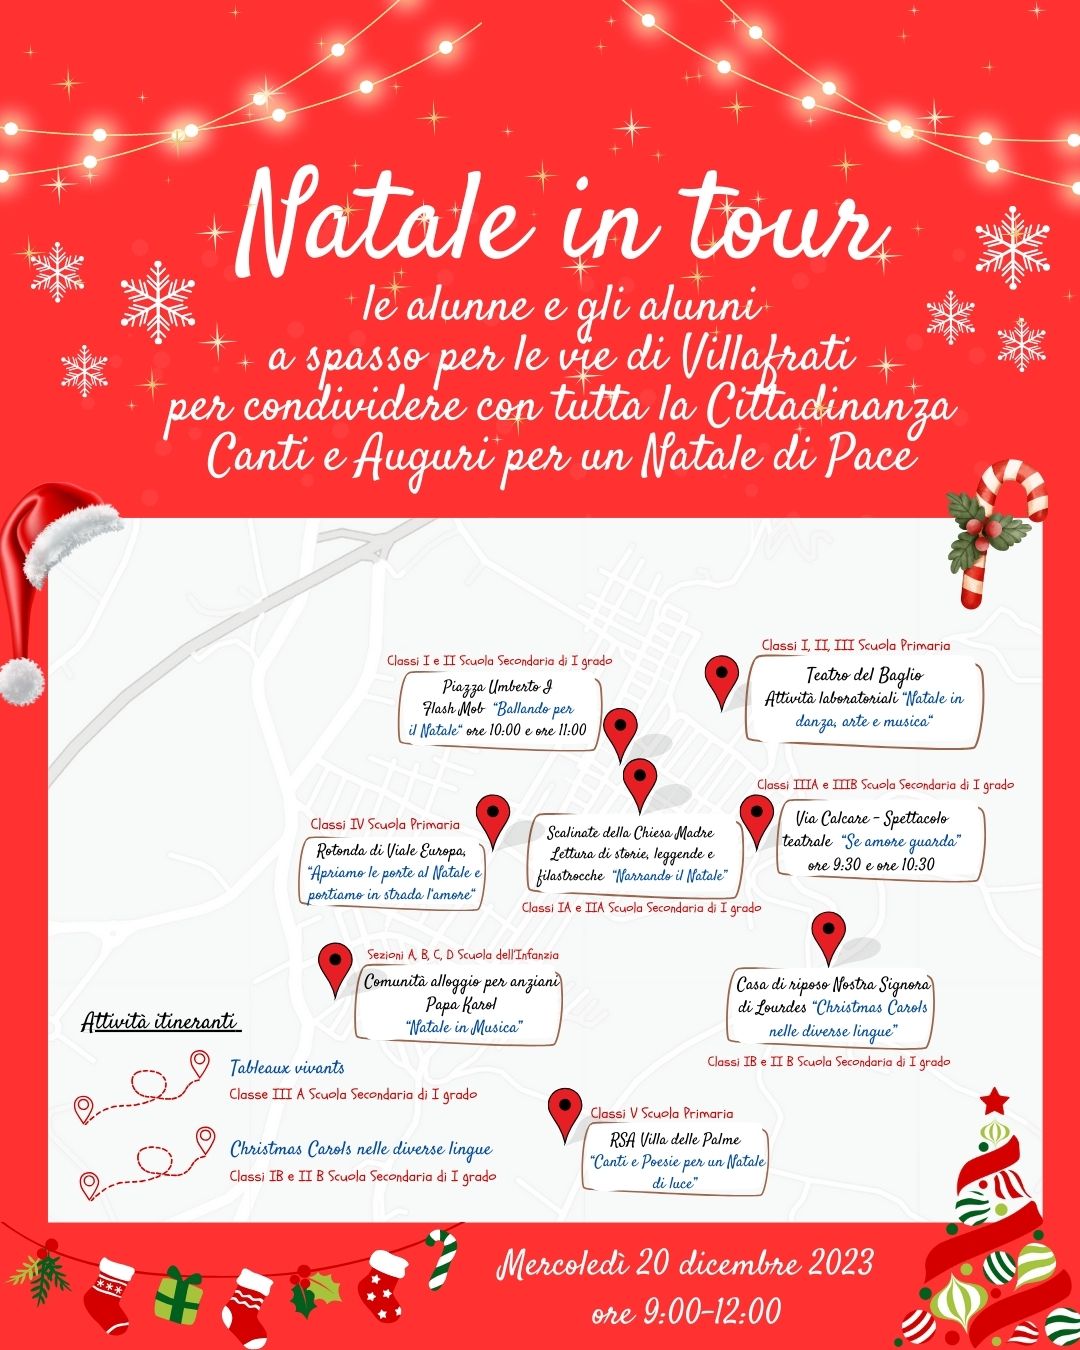 Natale in tour